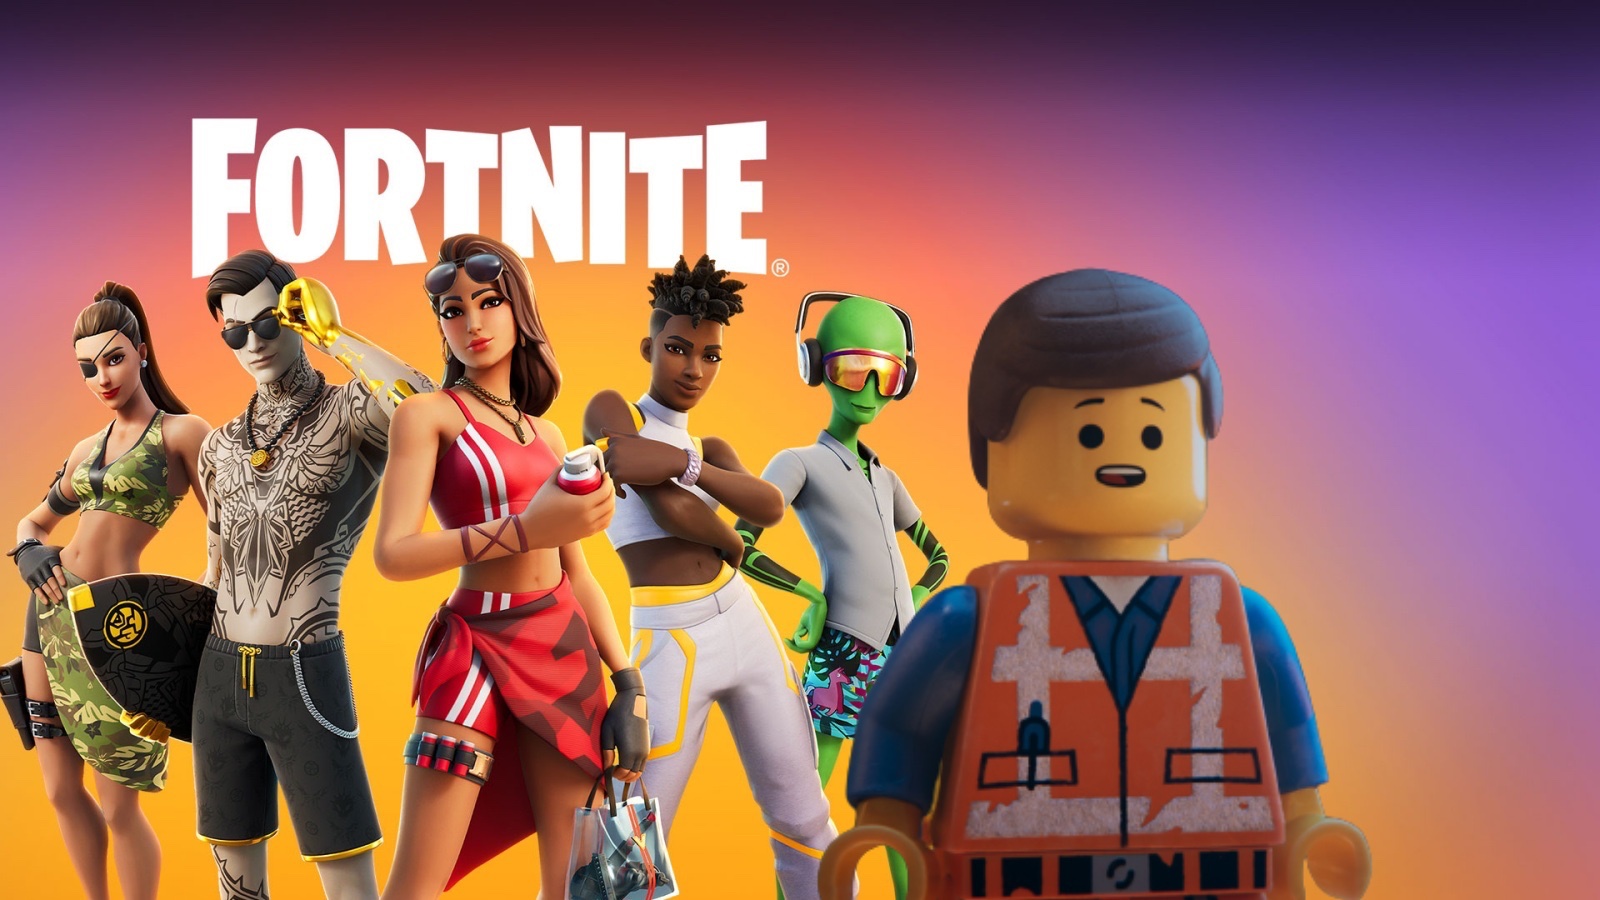 Fortnite leaker claims LEGO mode is in the works with “unique enemies” – Dexerto